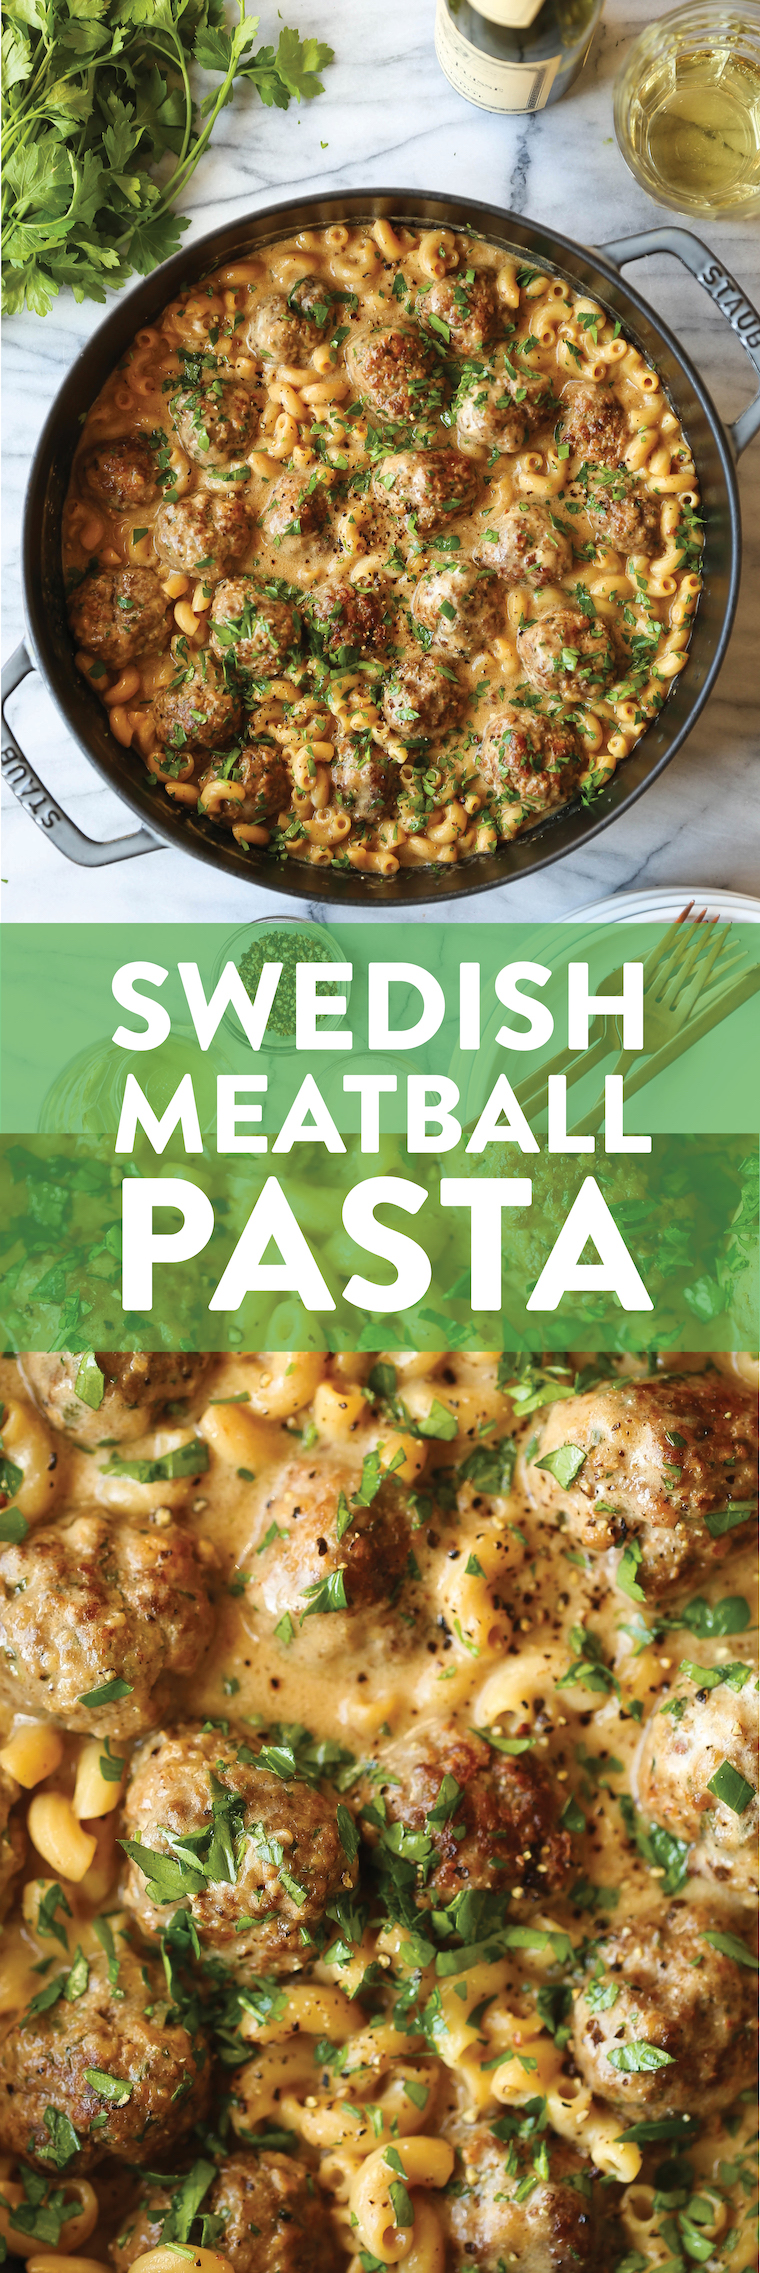 Swedish Meatball Pasta - Everyone's favorite Swedish meatballs with pasta noodles tossed right into that cream sauce goodness. So heavenly, so good.